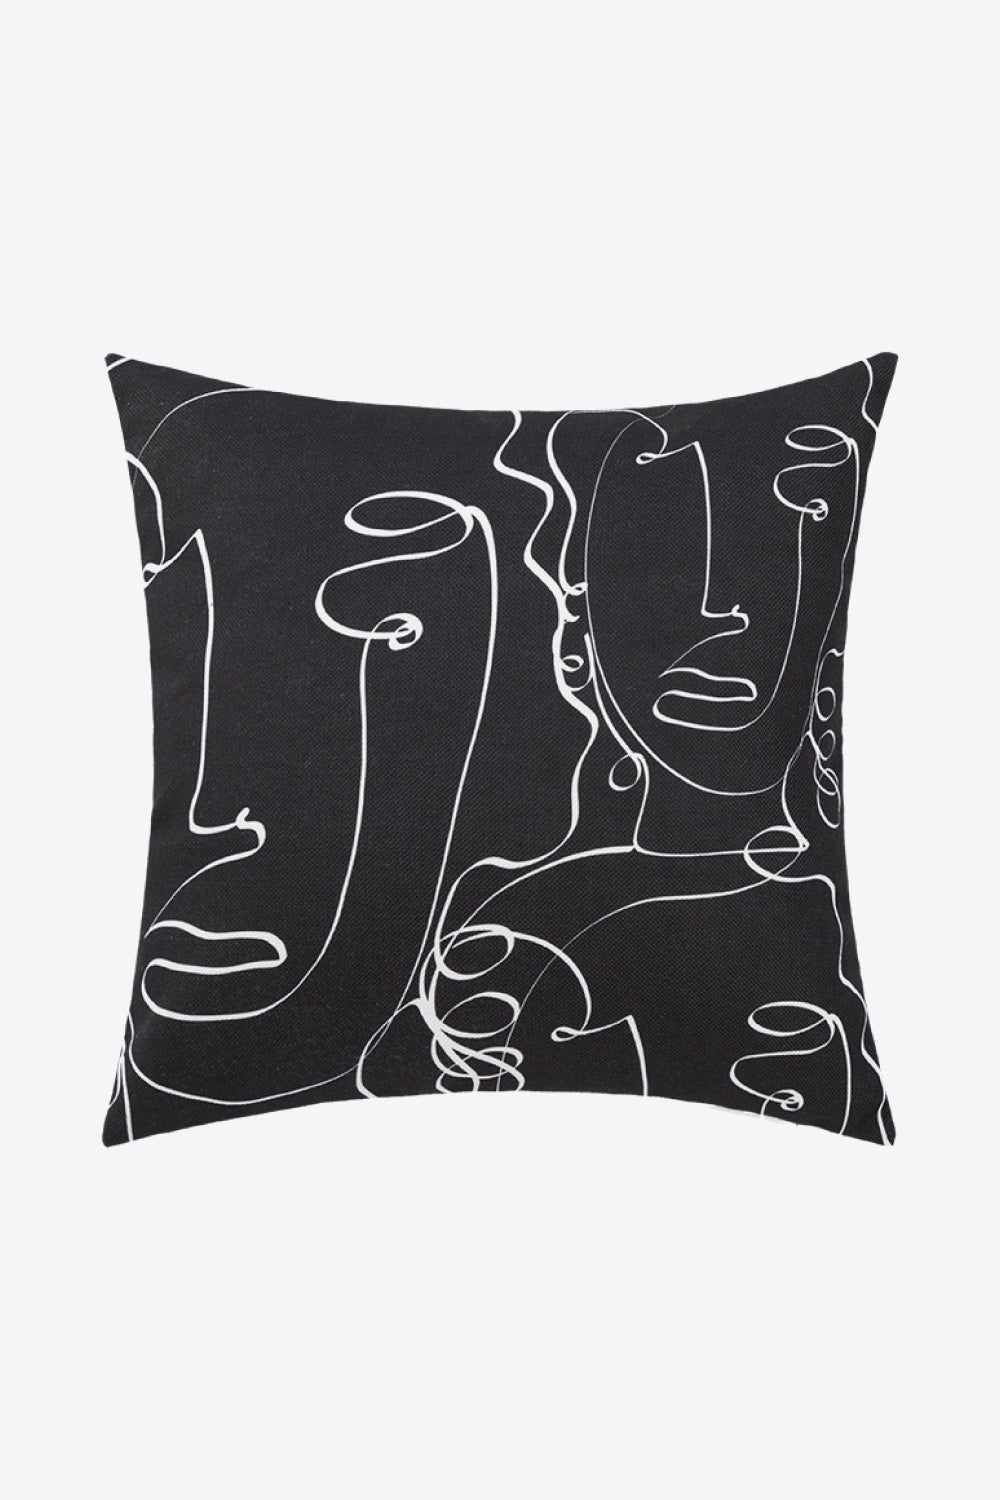 White Smoke 2-Pack Decorative Throw Pillow Cases Sentient Beauty Fashions Home Decor